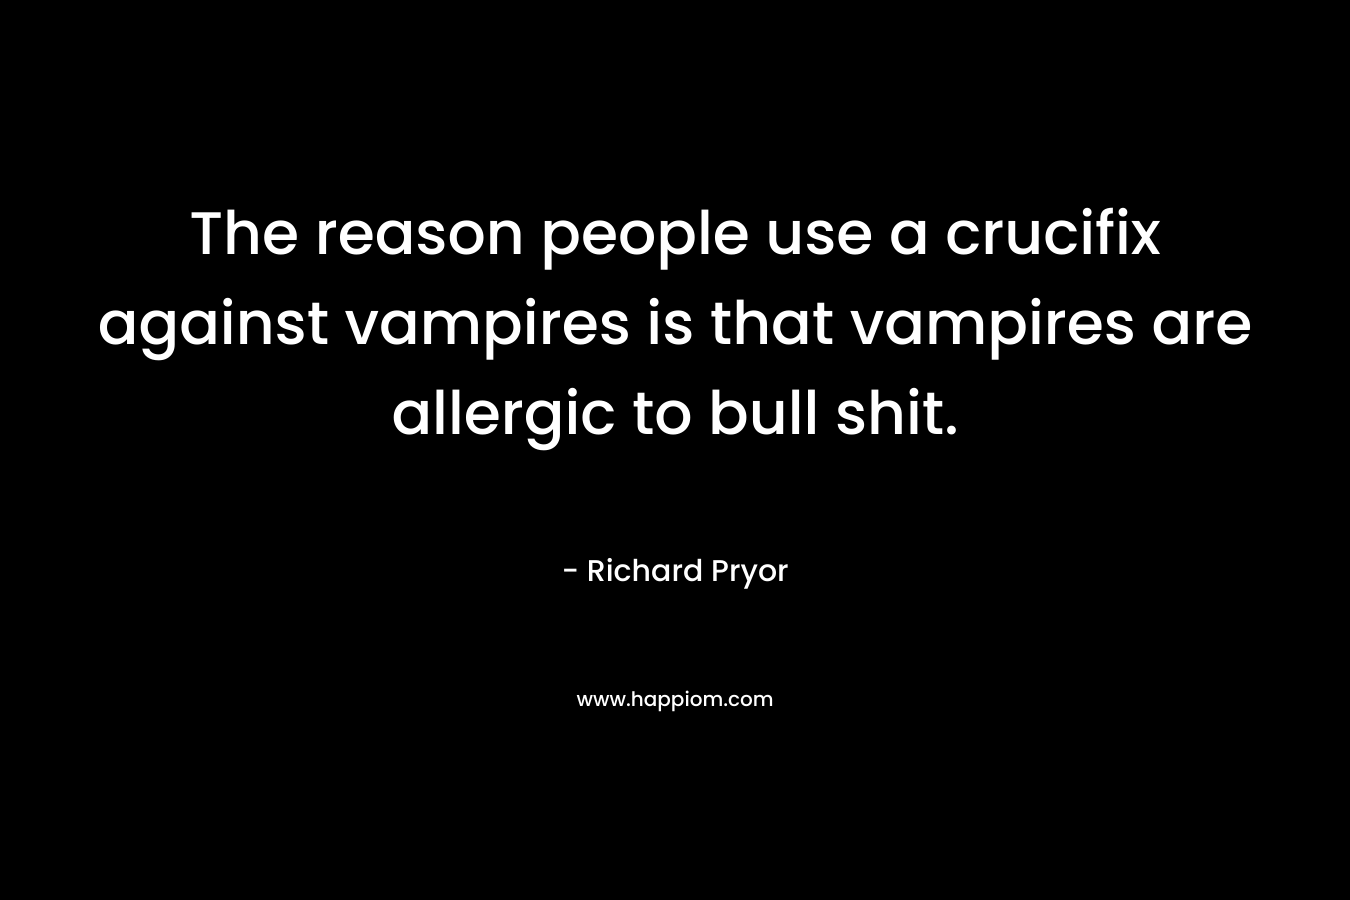 The reason people use a crucifix against vampires is that vampires are allergic to bull shit.